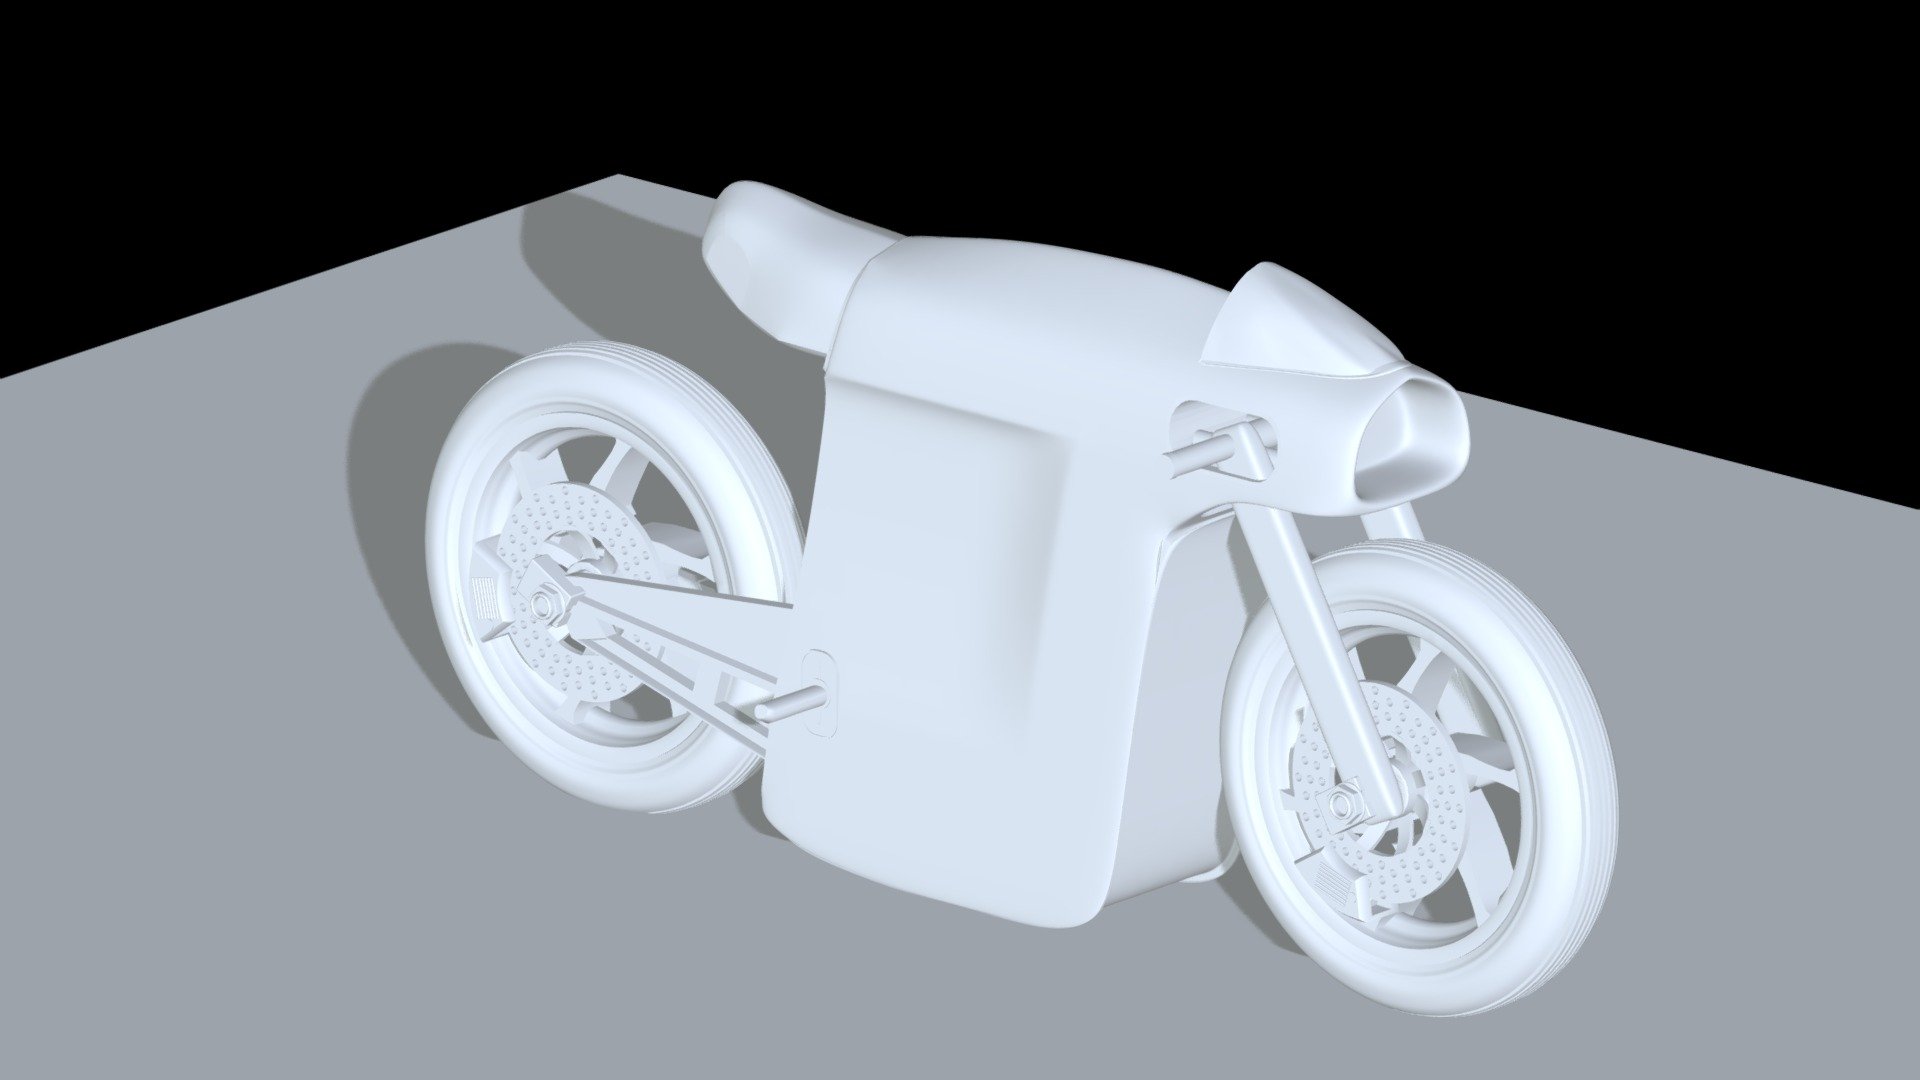 Custom Cafe Racer Motorcycle | CINEMA 4D
Tried to emulate some of the older racing models into this style of motorcyle 3d model